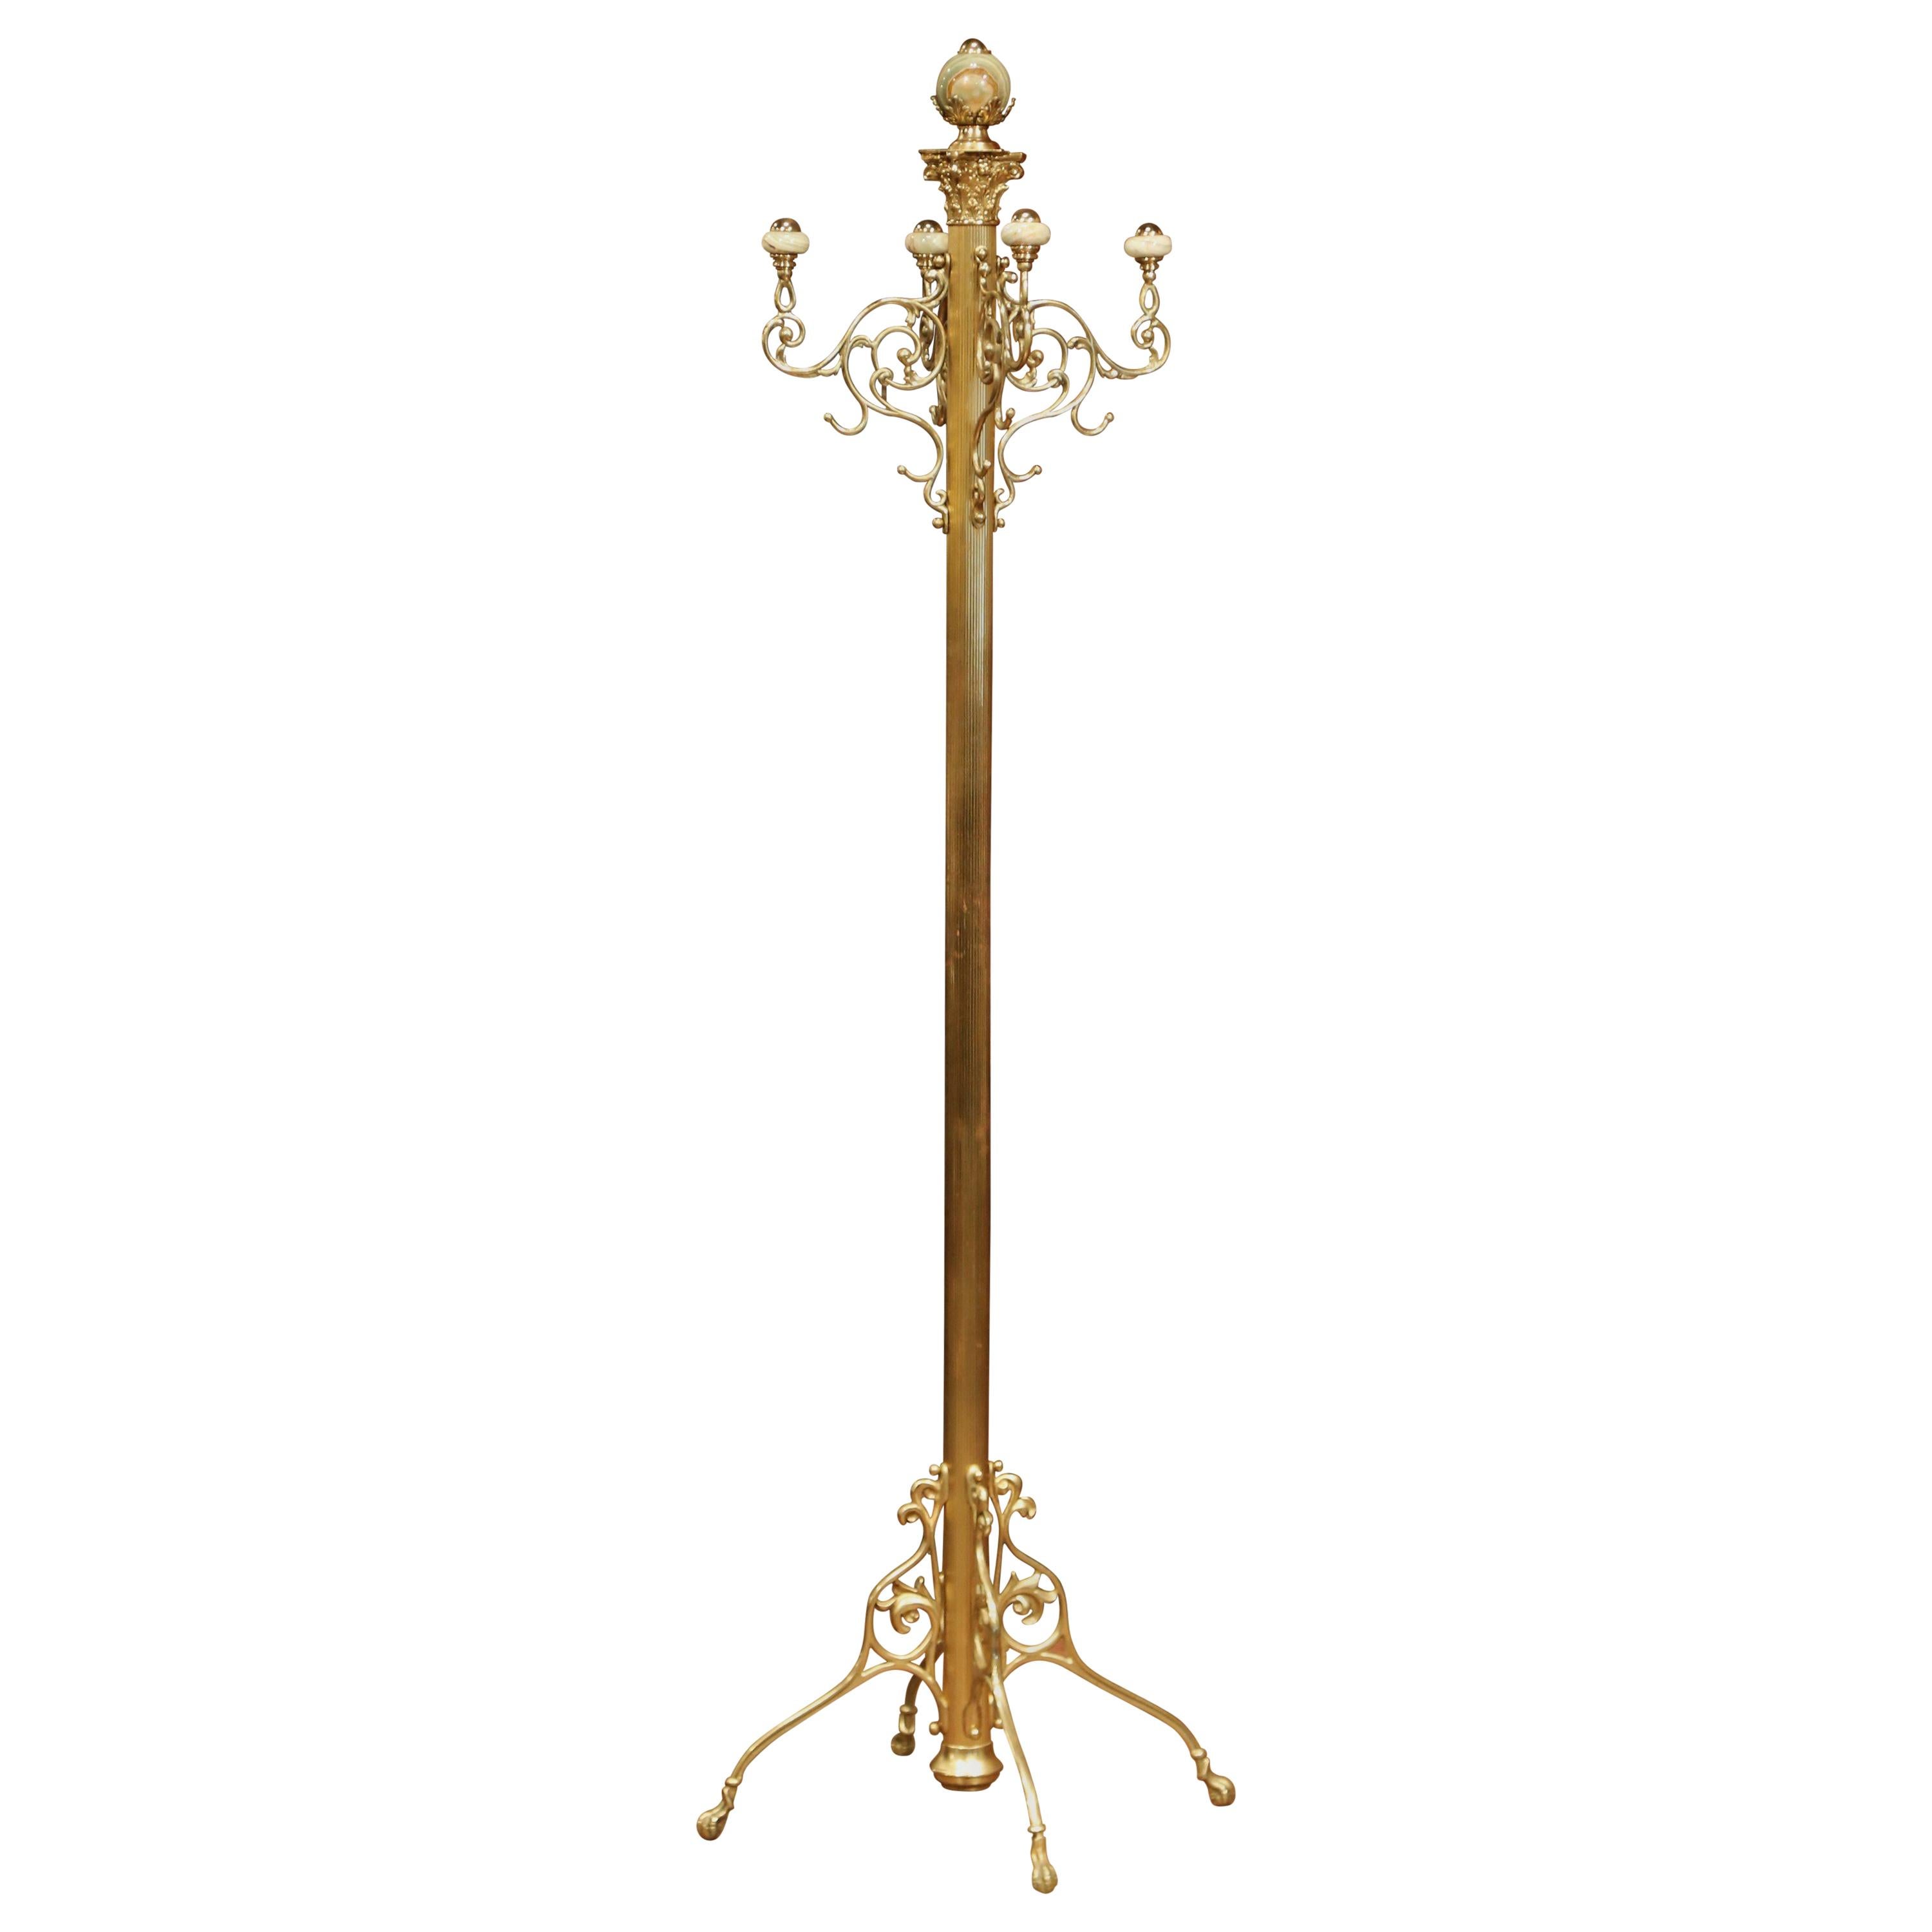 Mid-20th Century French Art Deco Ornate Brass and Marble Coat Stand